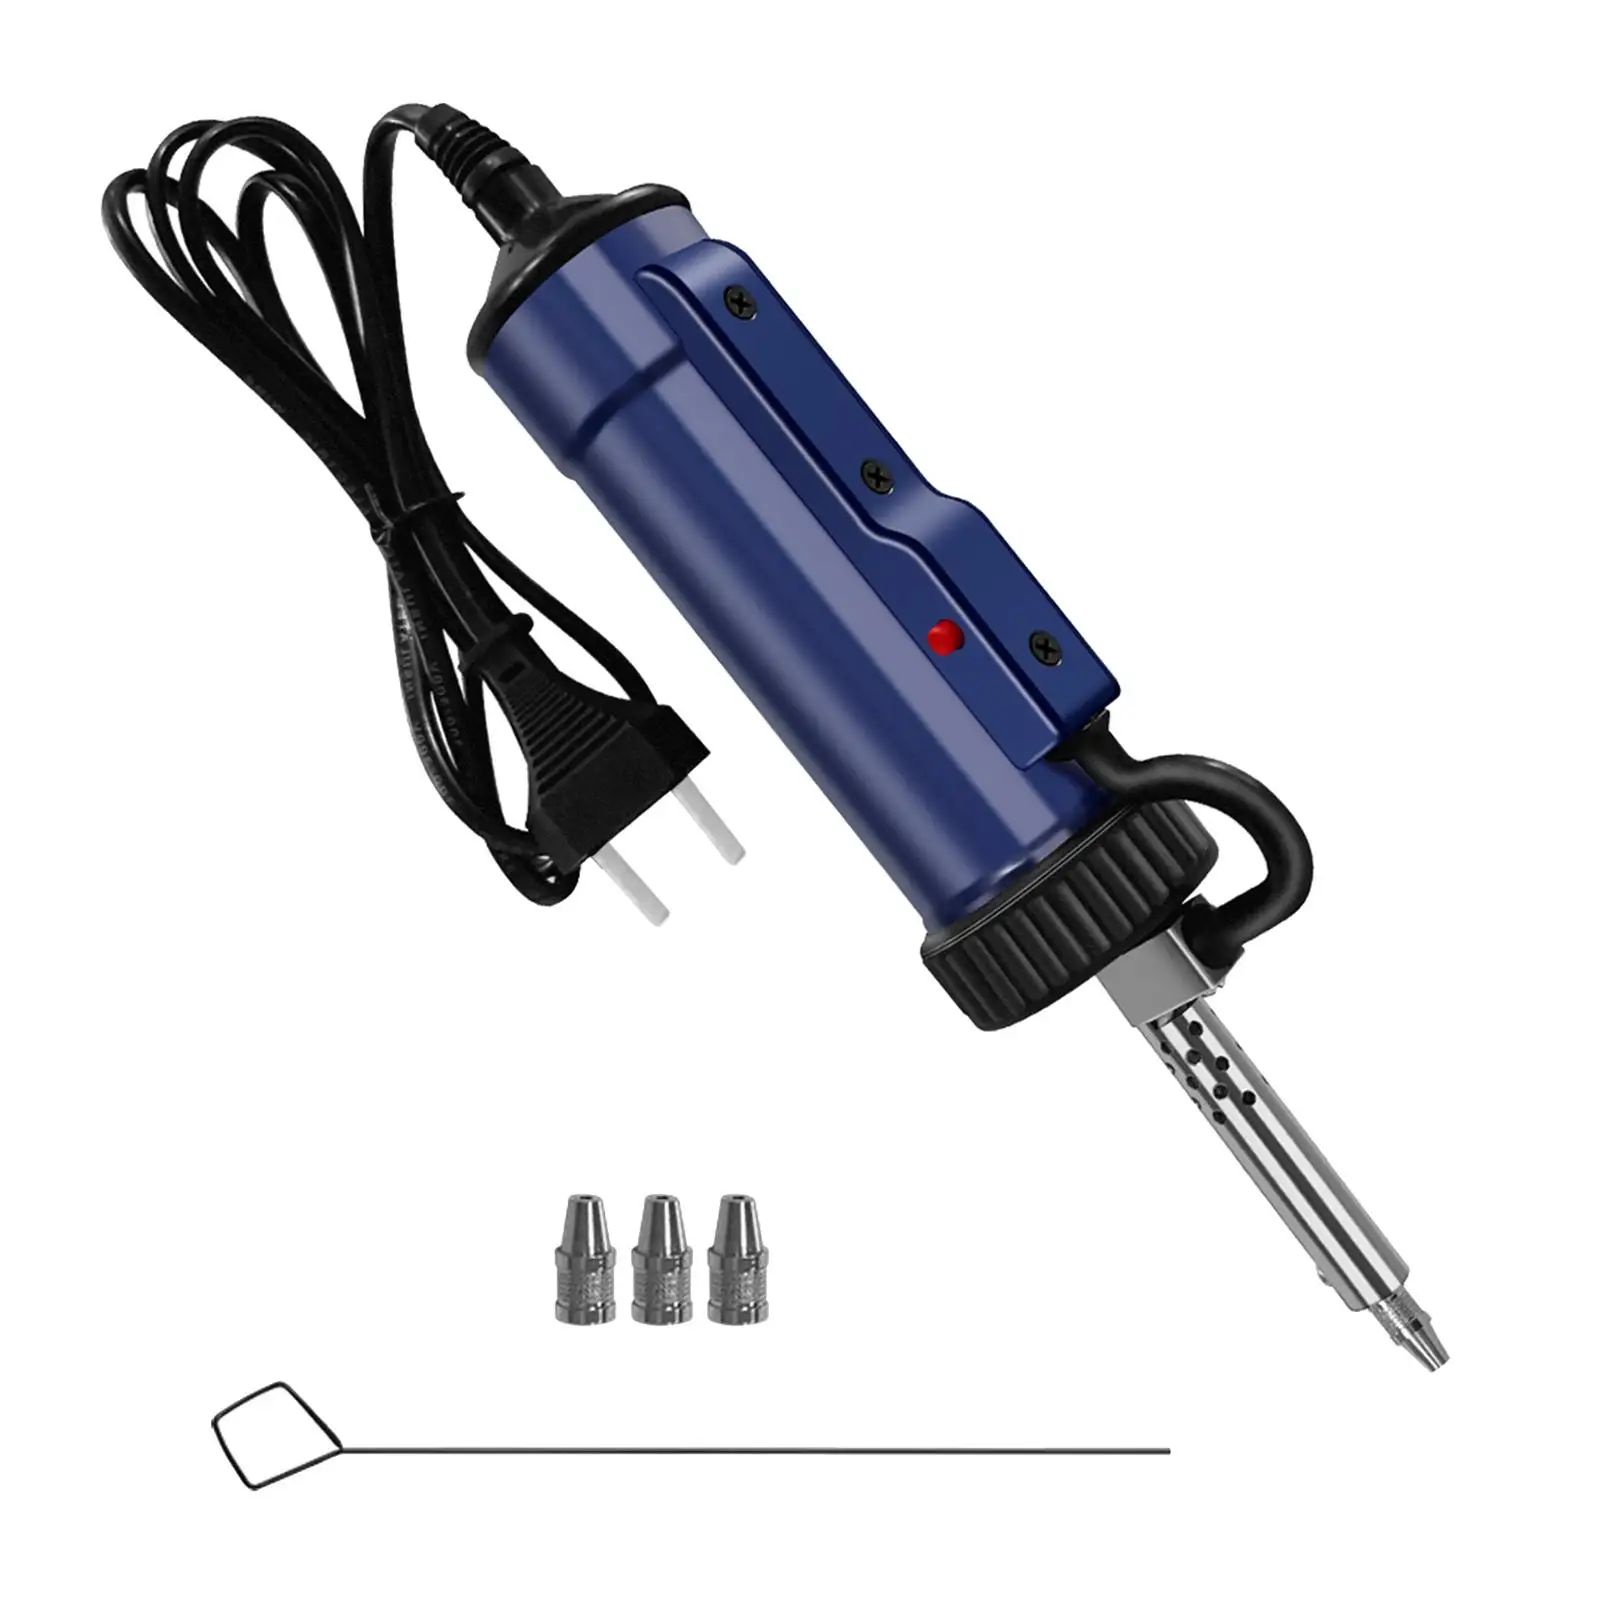 Automatic Handheld Solder Iron Kits US Adapter Solder suckers for Industry Circuit Board Jewelry Home DIY Hobby Appliance Repair